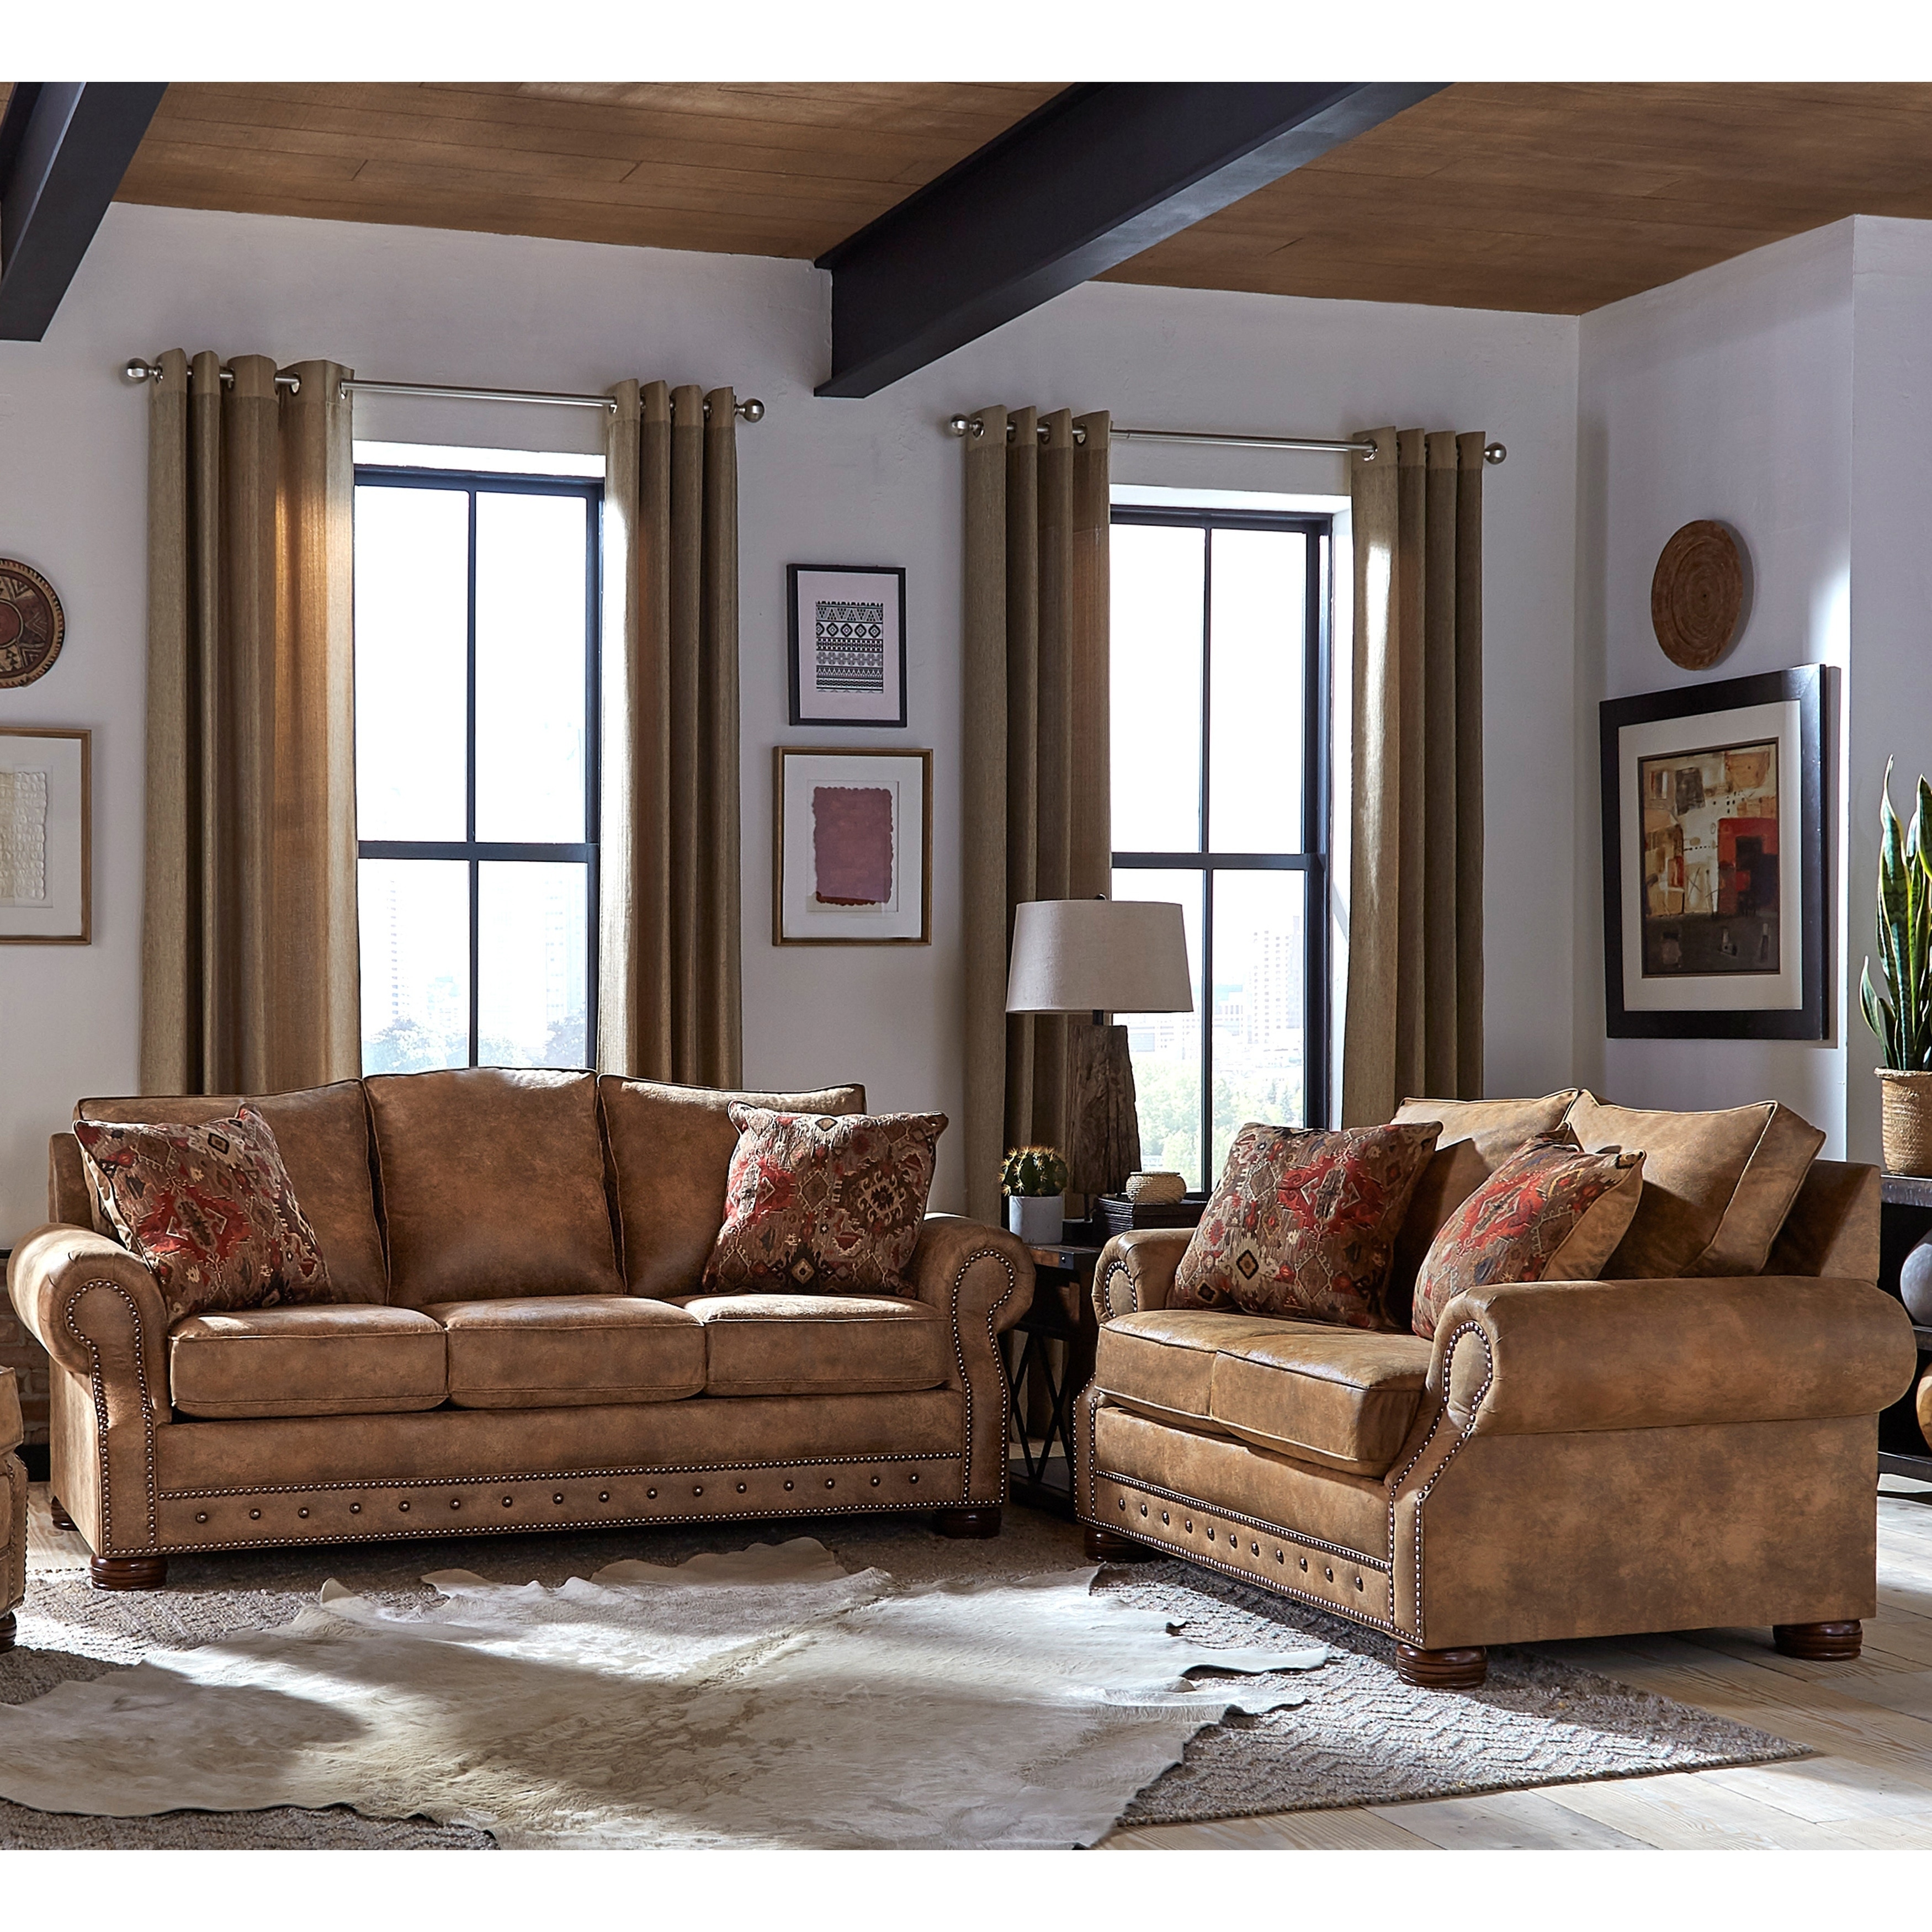 Made In USA Rancho Rustic Brown Buckskin Fabric Sofa And Loveseat On Sale Overstock 27415174